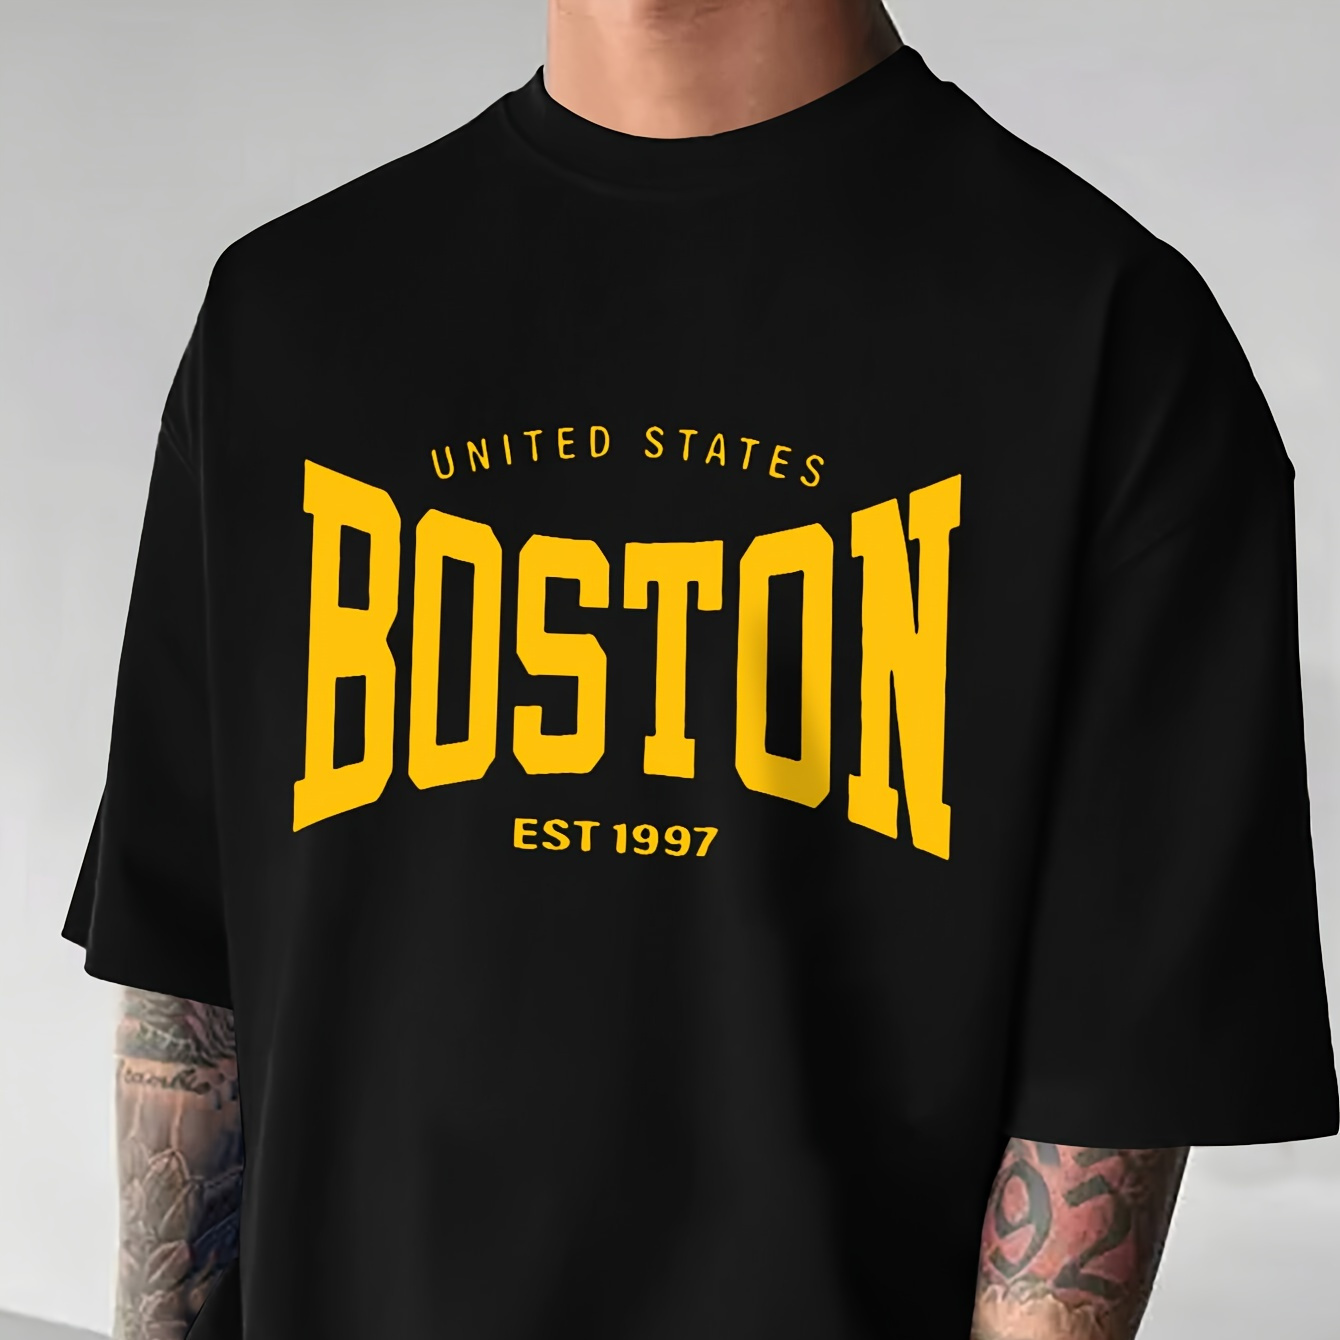 

Men's Crew Neck Graphic T-shirt With Fancy "boston" Print, Summer Short Sleeve Top For Men, Men's Soft And Trendy Comfy Tee